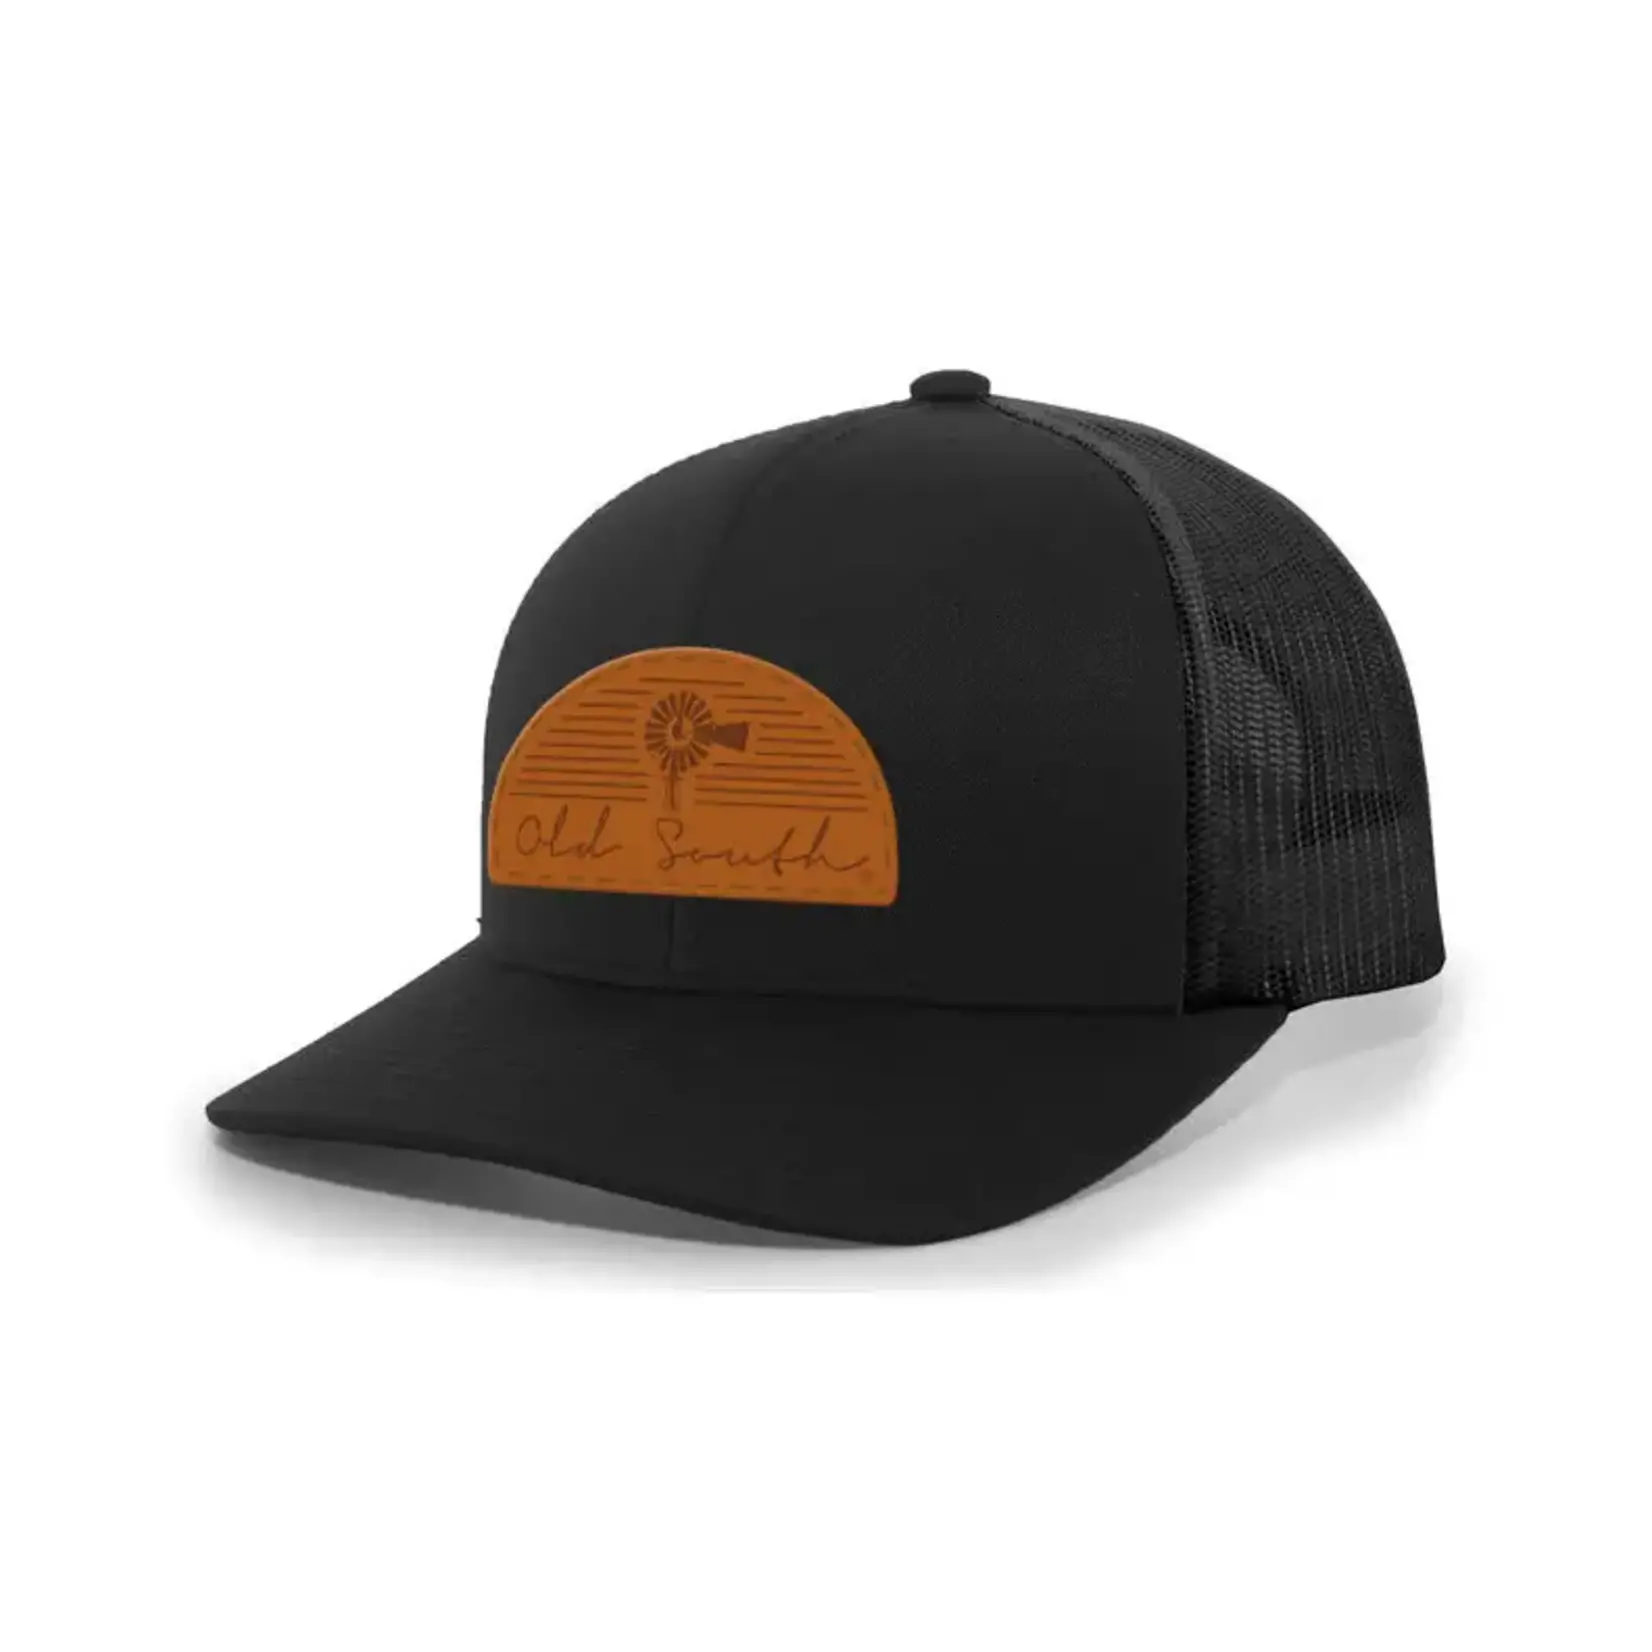 Old South Apparel Old South Apparel Arch Leather Logo Patch Snapback Hat